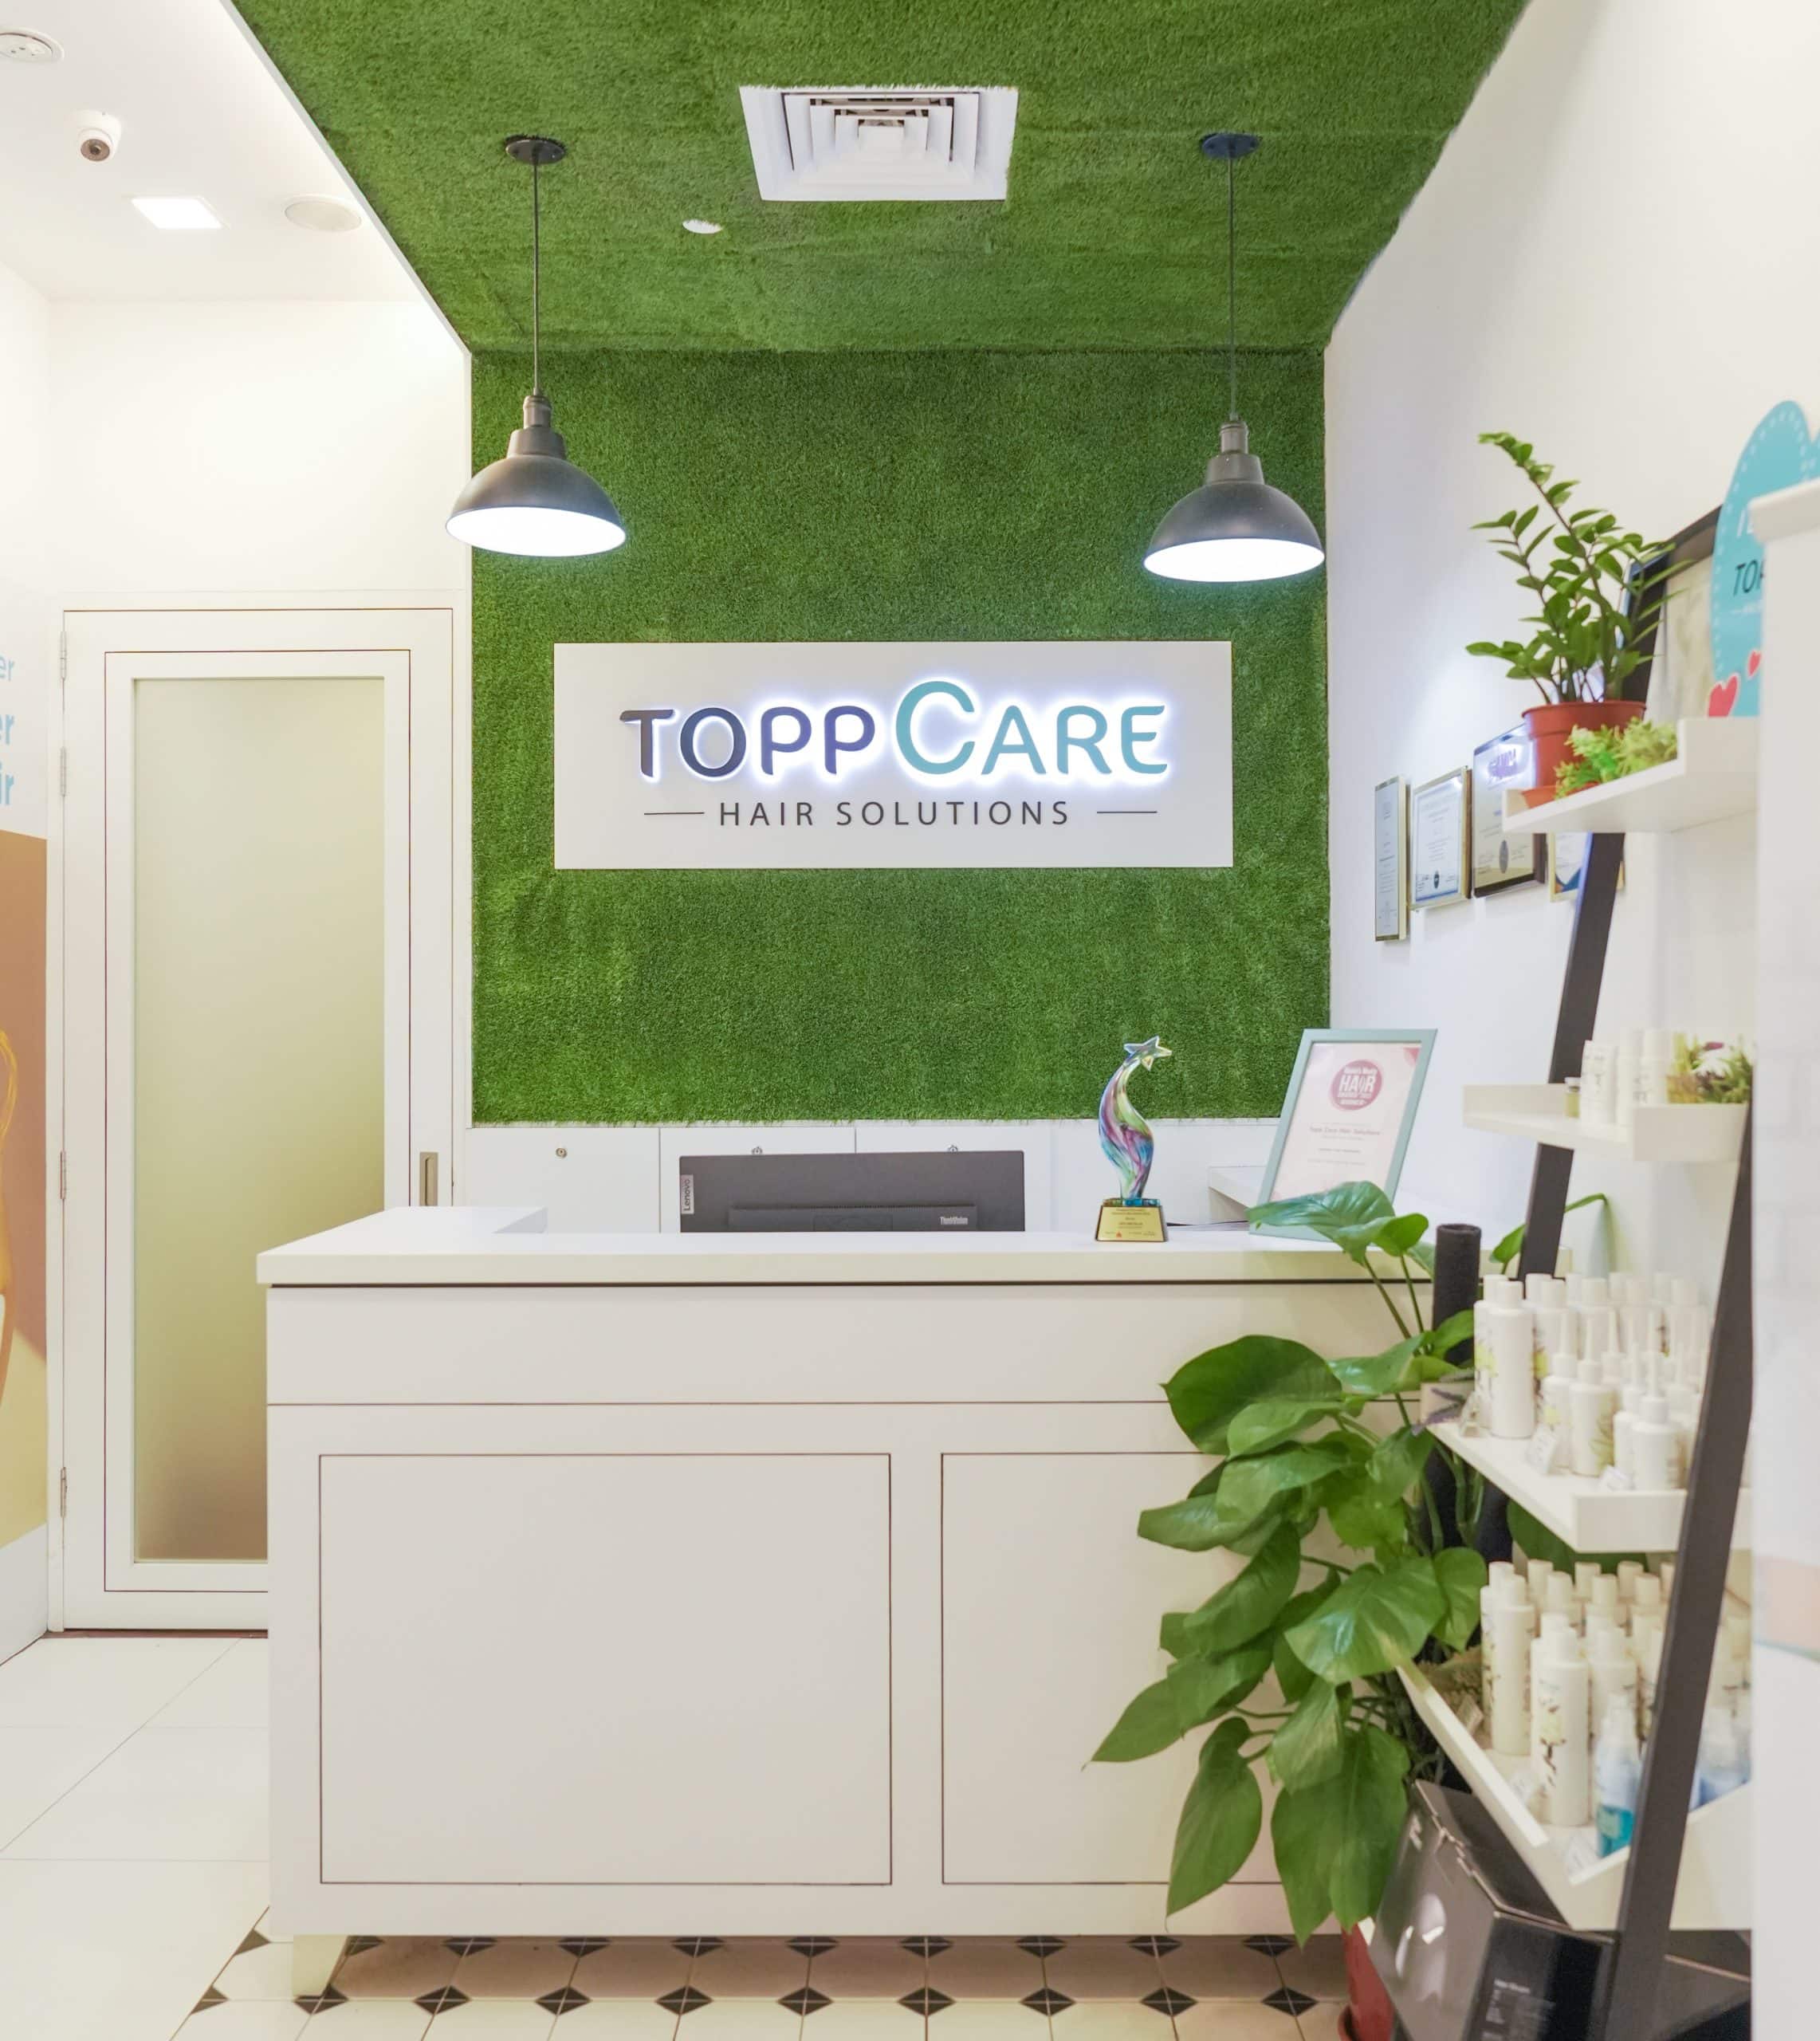 Topp Care Hair Solutions